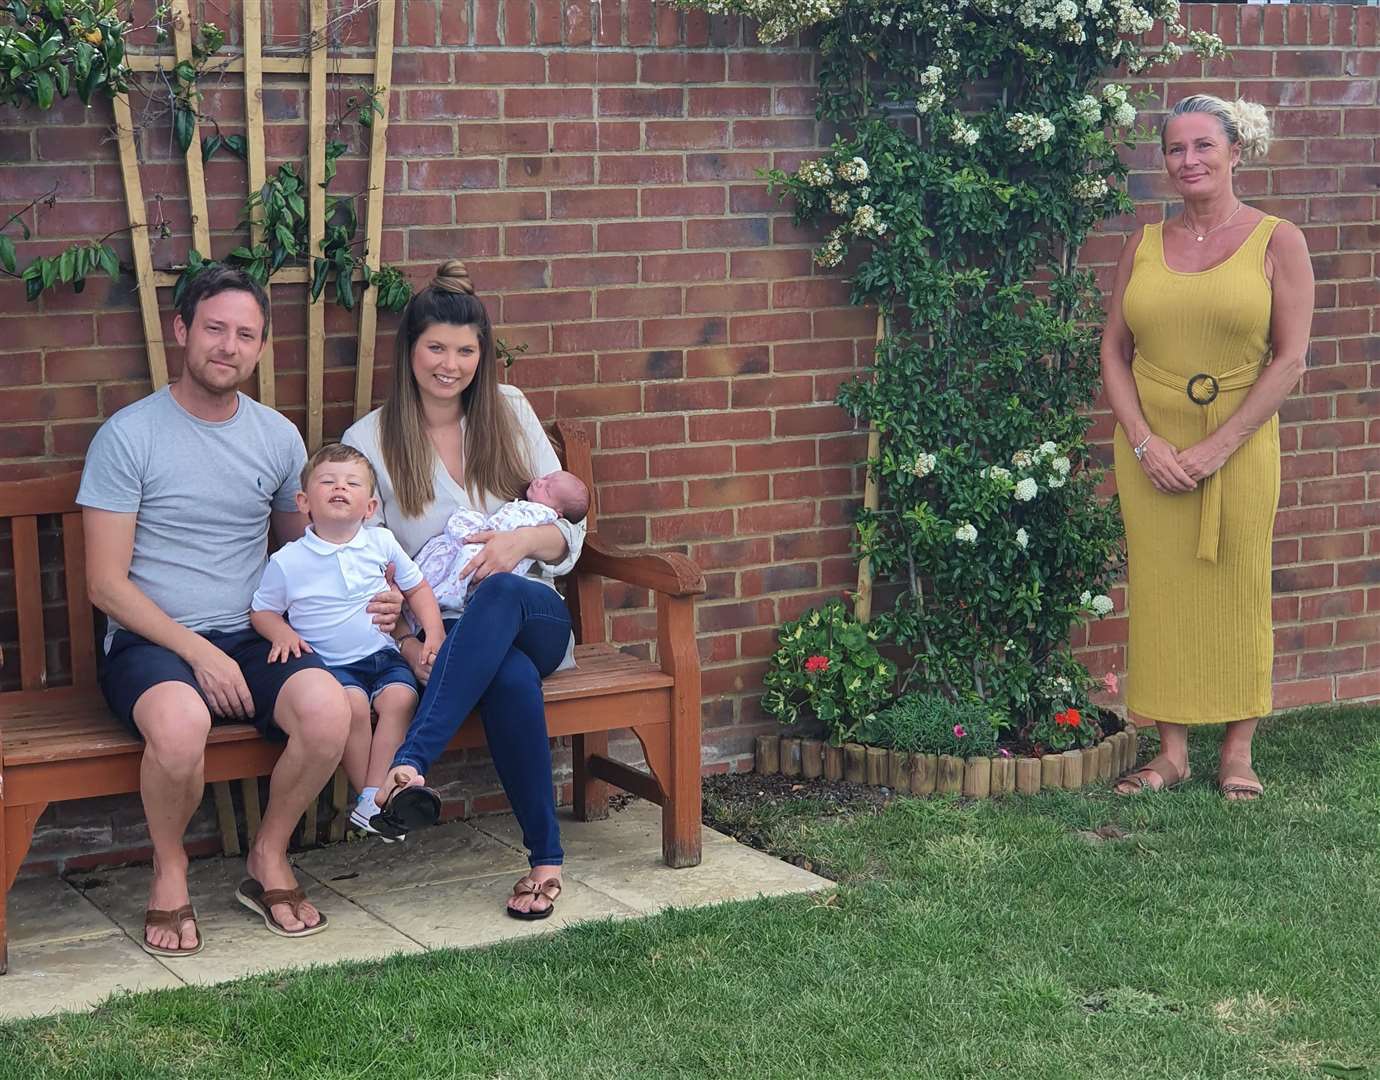 Robert and Emma with their children, Arthur and Sienna, and neighbour Mandy Petrou